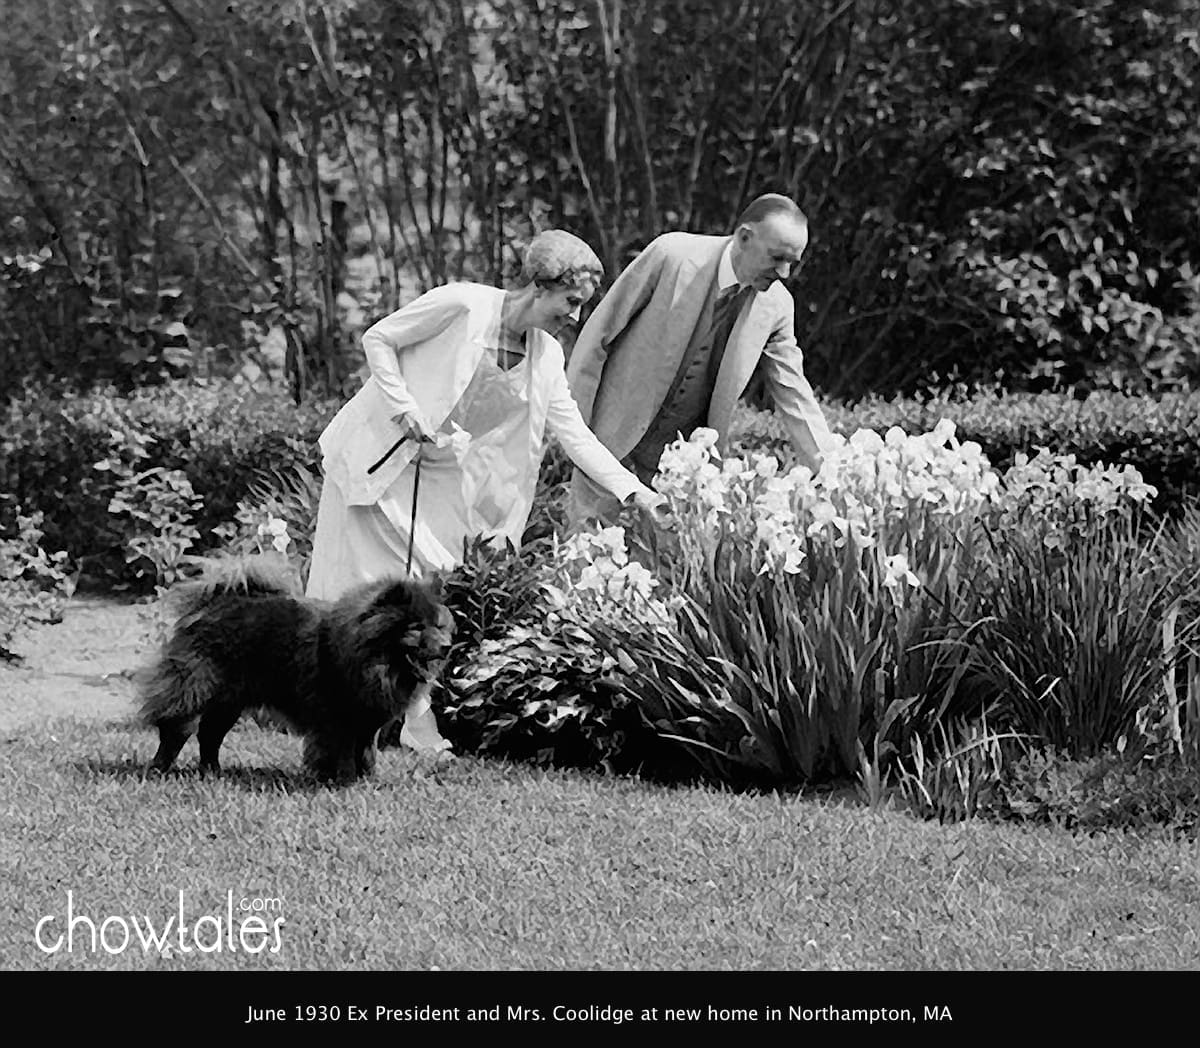 June 1930 Ex Pres. and Mrs. Coolidge at new home in Northampton, MA